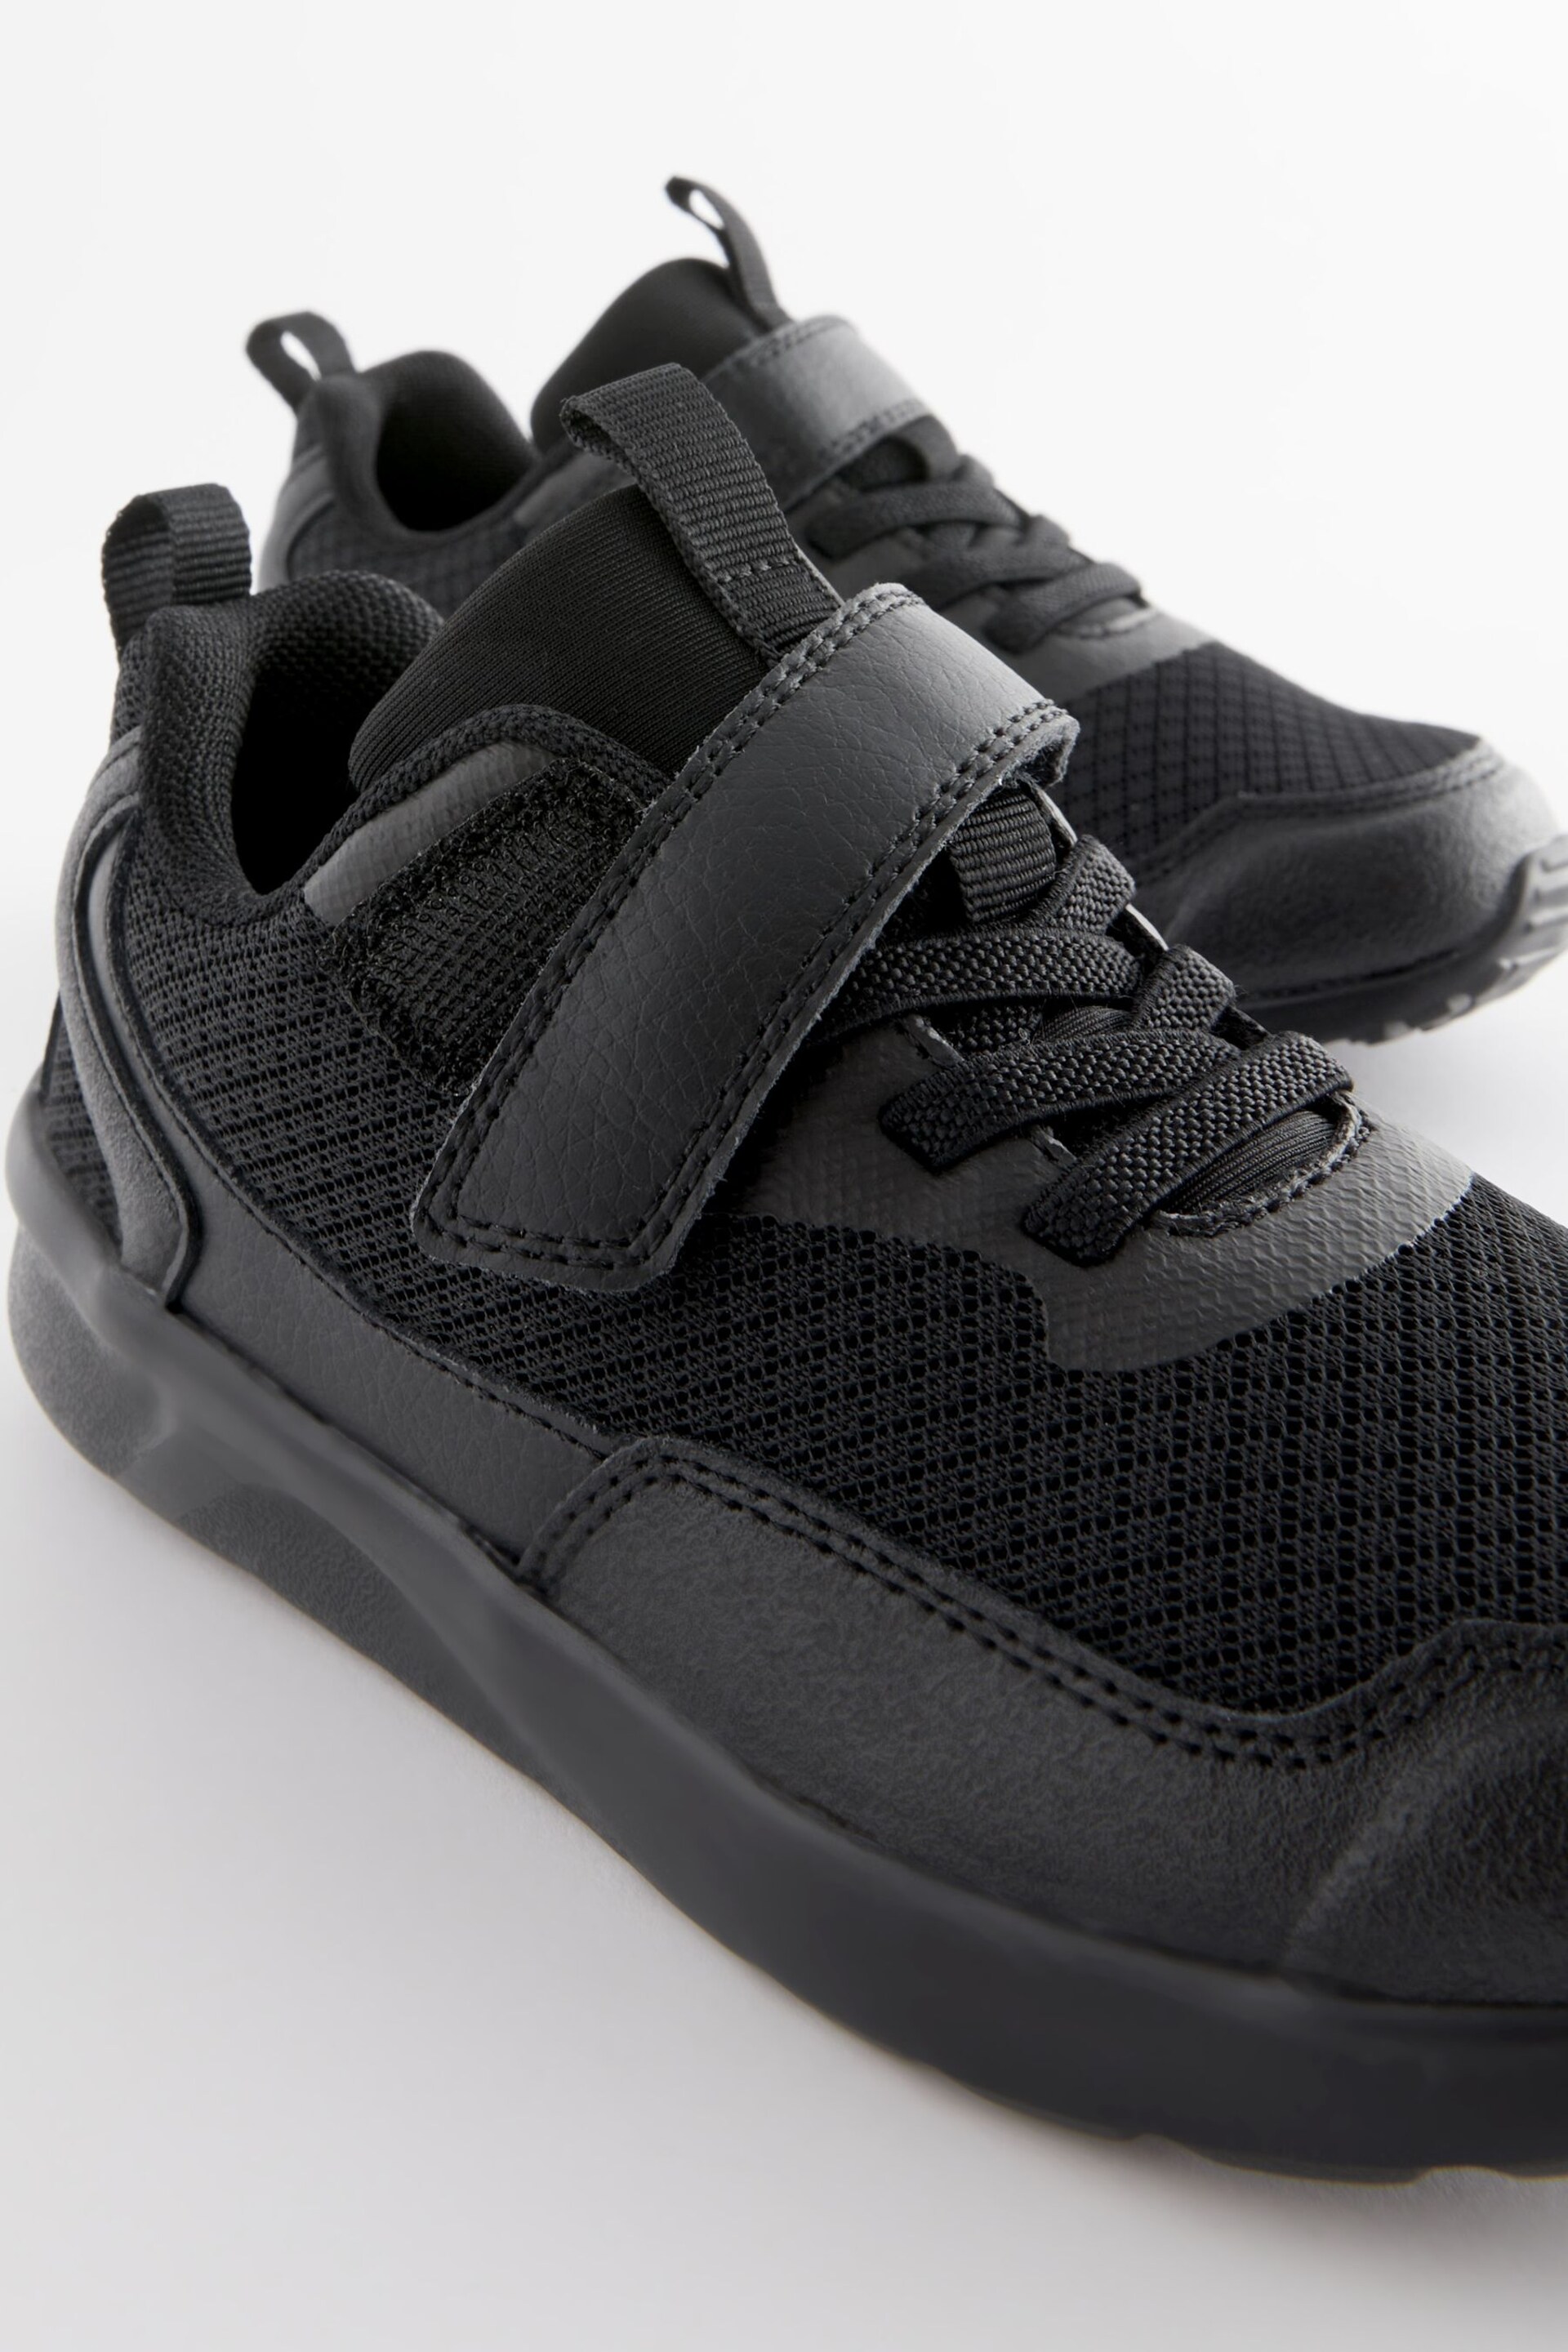 Black Wide Fit (G) Single Strap Trainers - Image 4 of 5